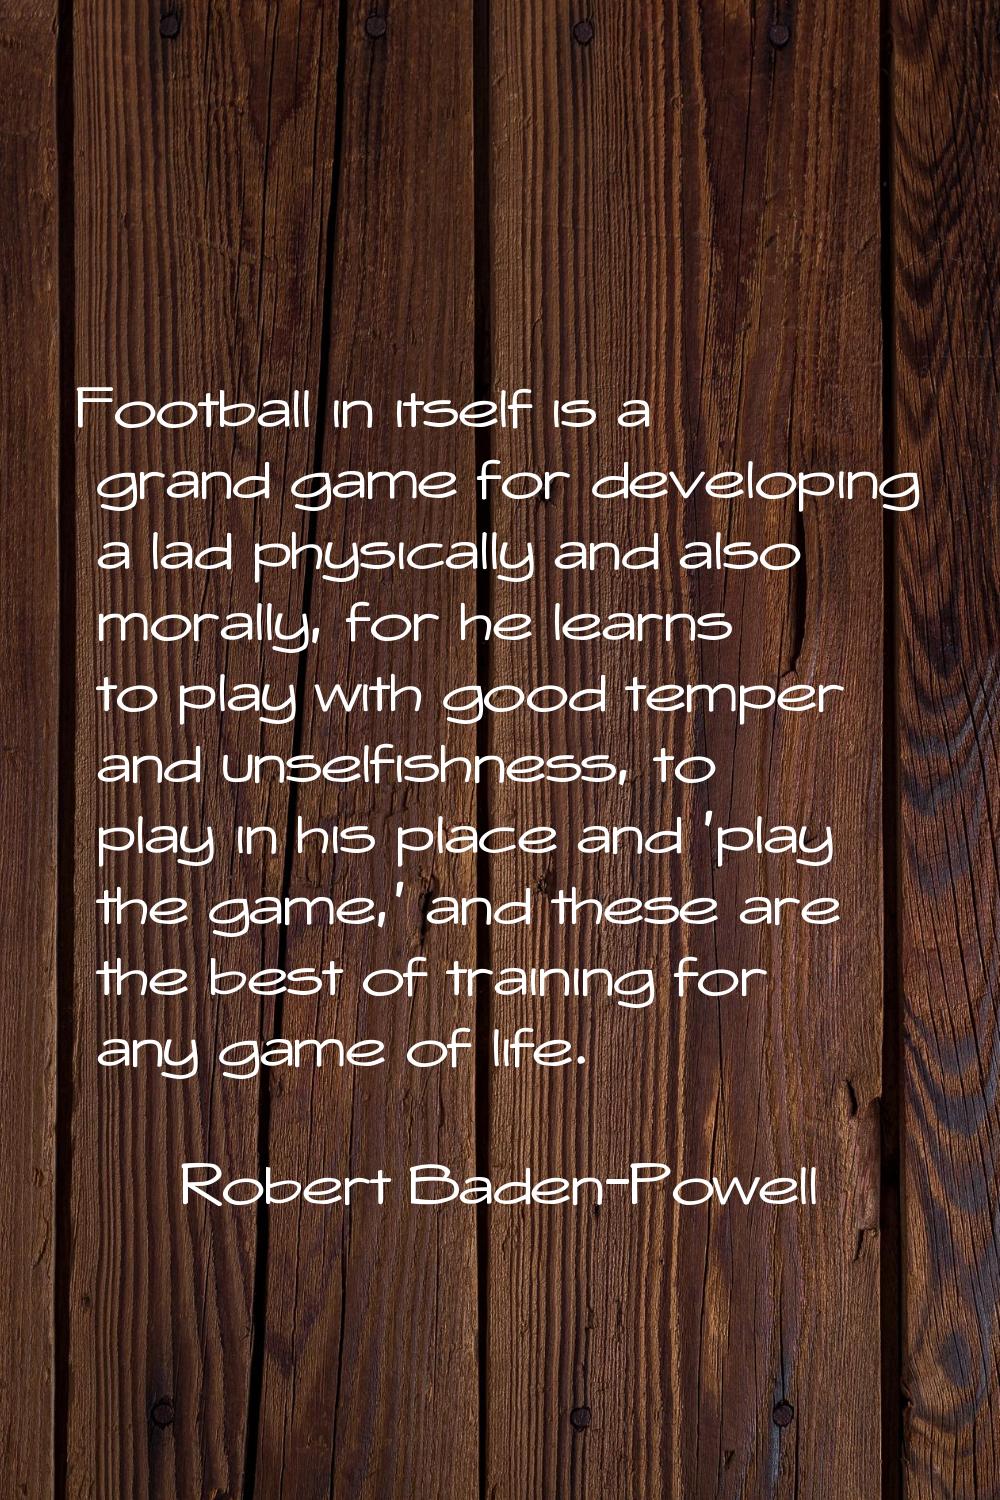 Football in itself is a grand game for developing a lad physically and also morally, for he learns 